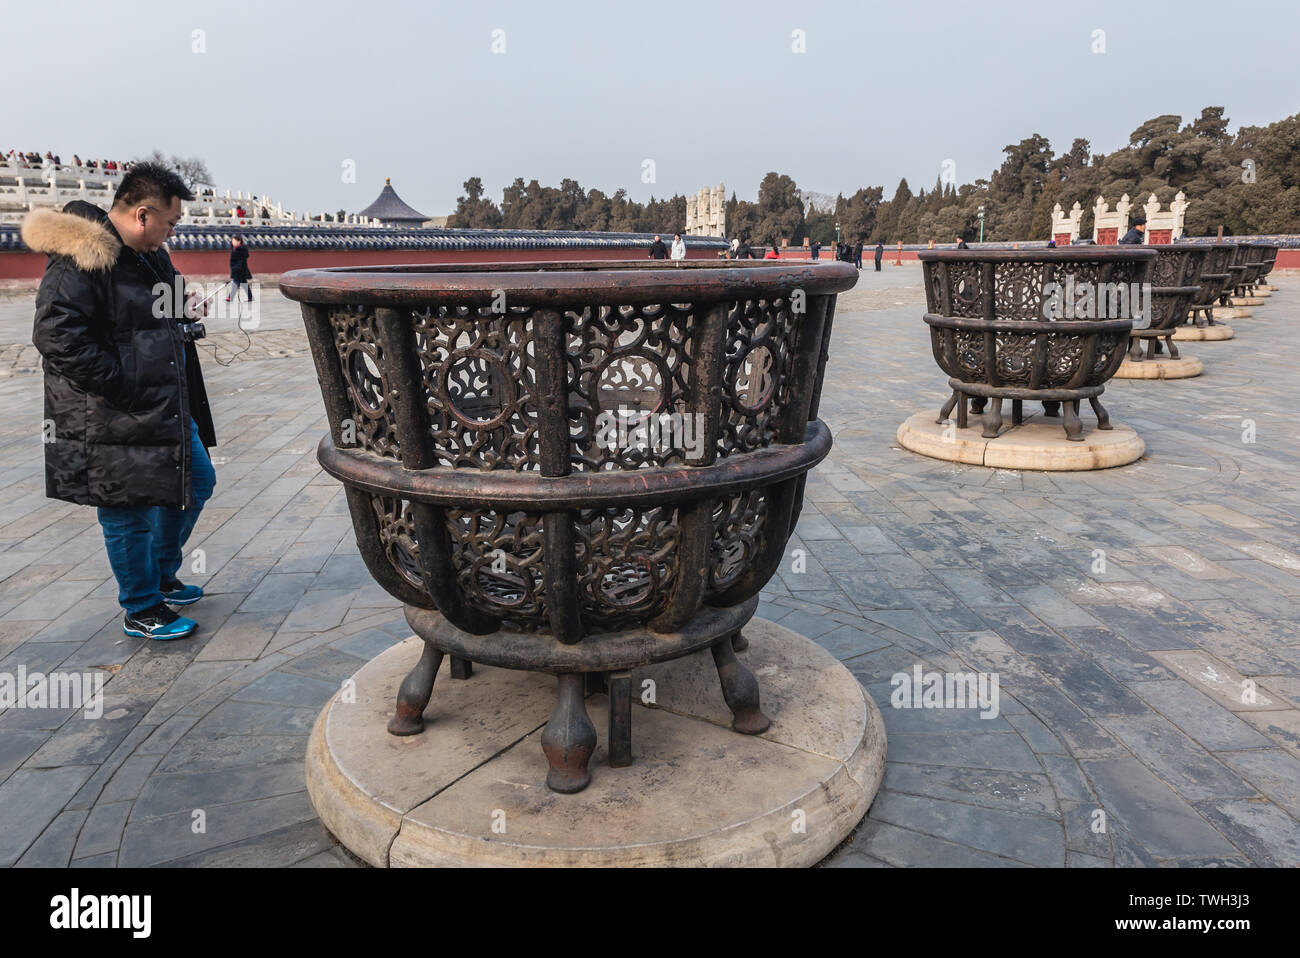 Iron stoves for burning the offerings next to Circular Mound Altar in Temple of Heaven in Beijing, China Stock Photo